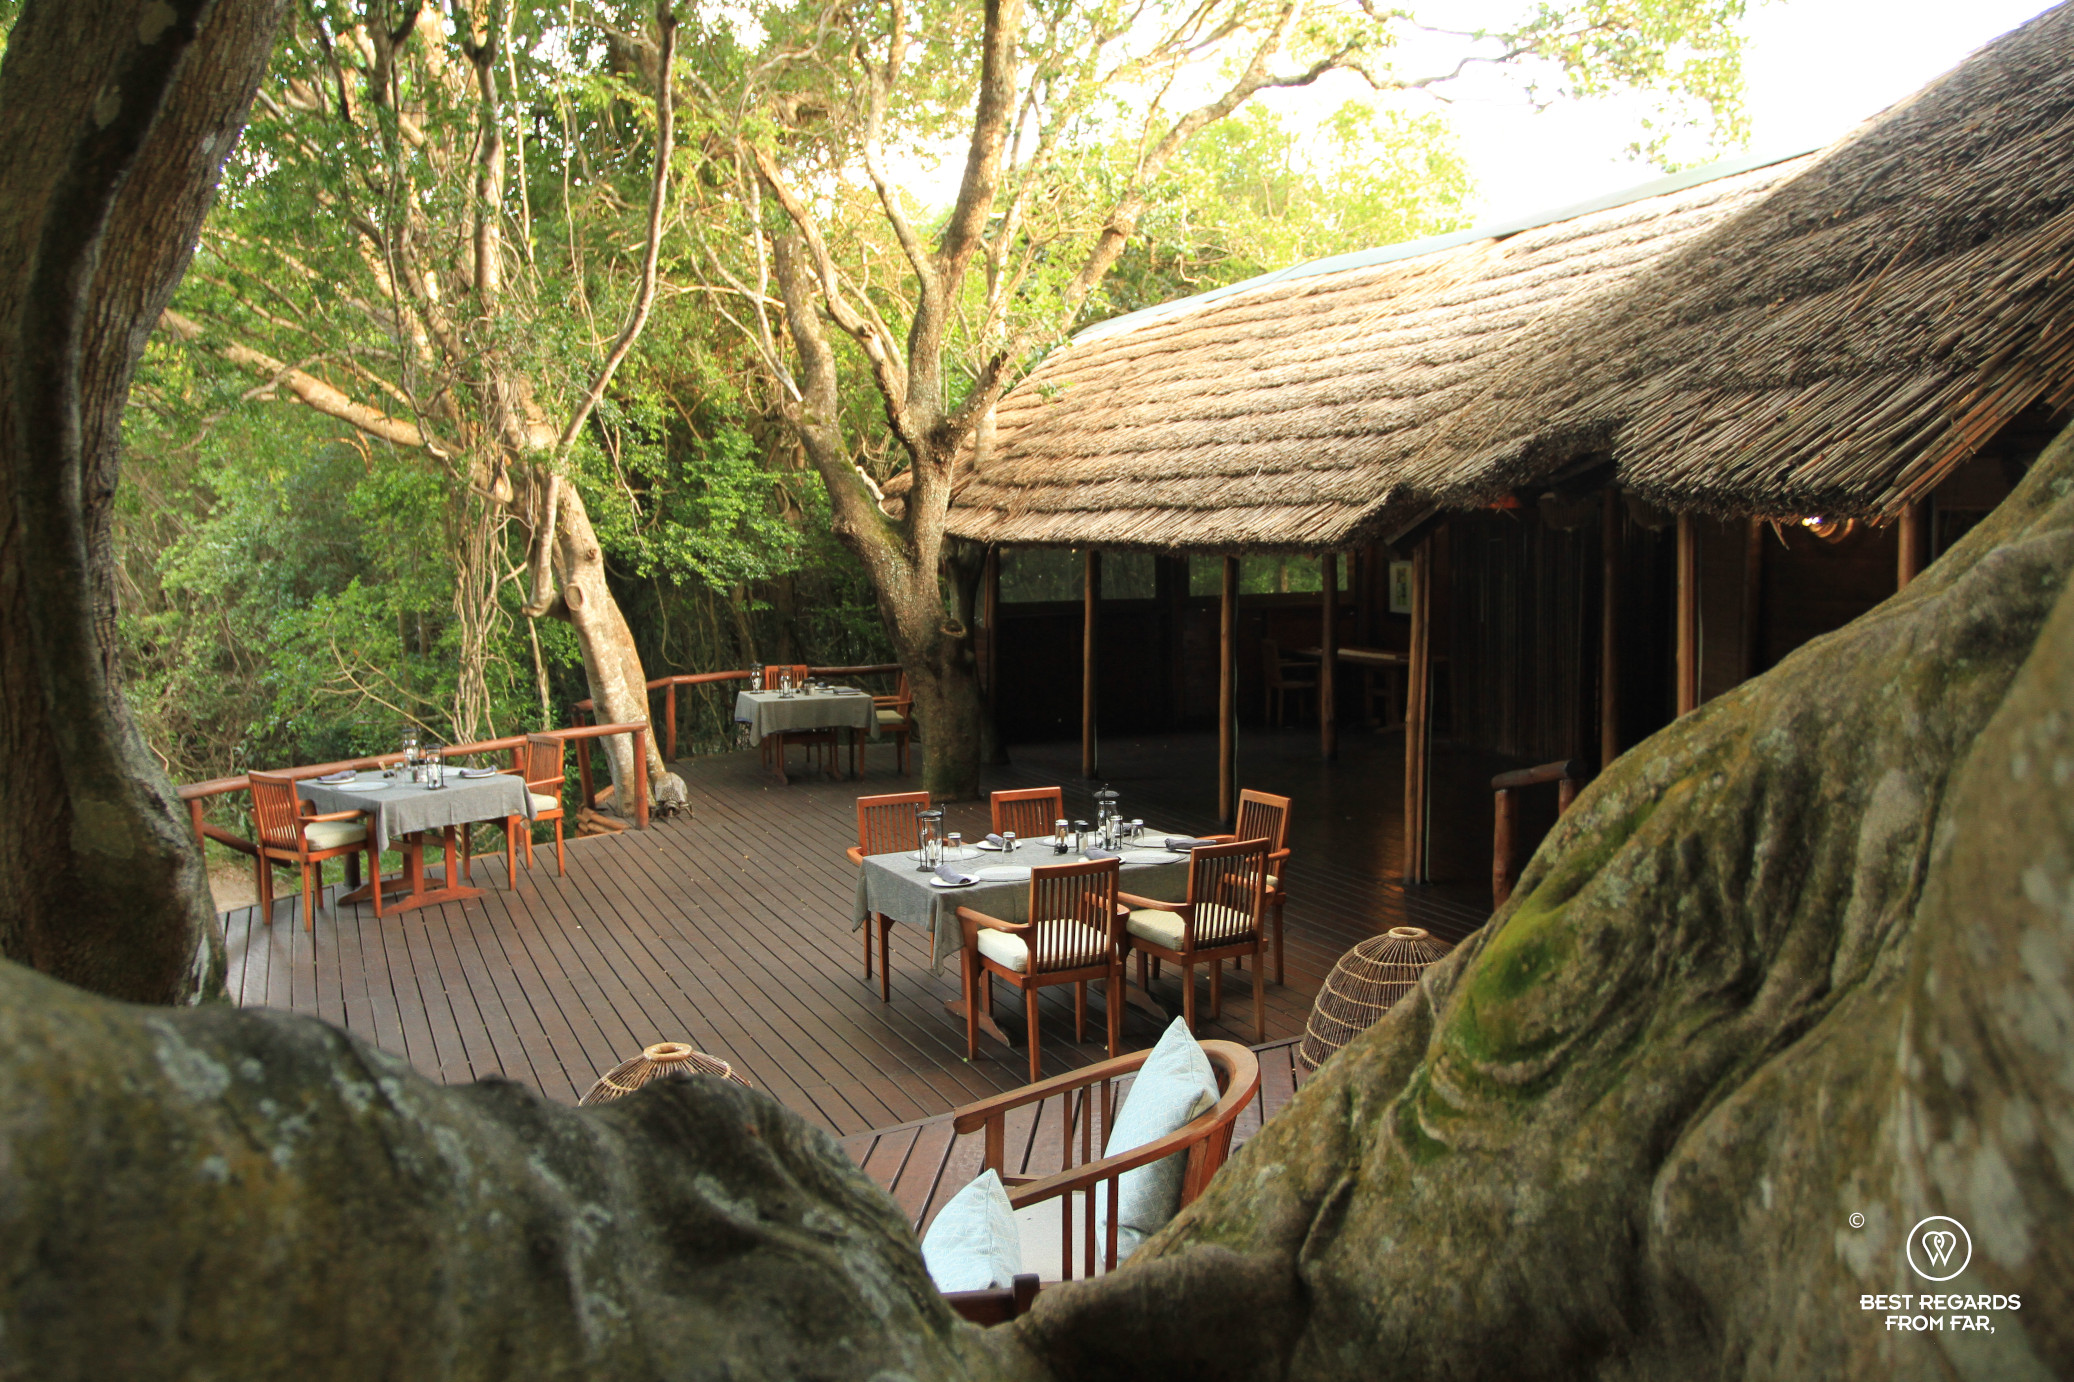 The restaurant area in the forest at Isibindi Kosi Forest Lodge, Kosi Bay